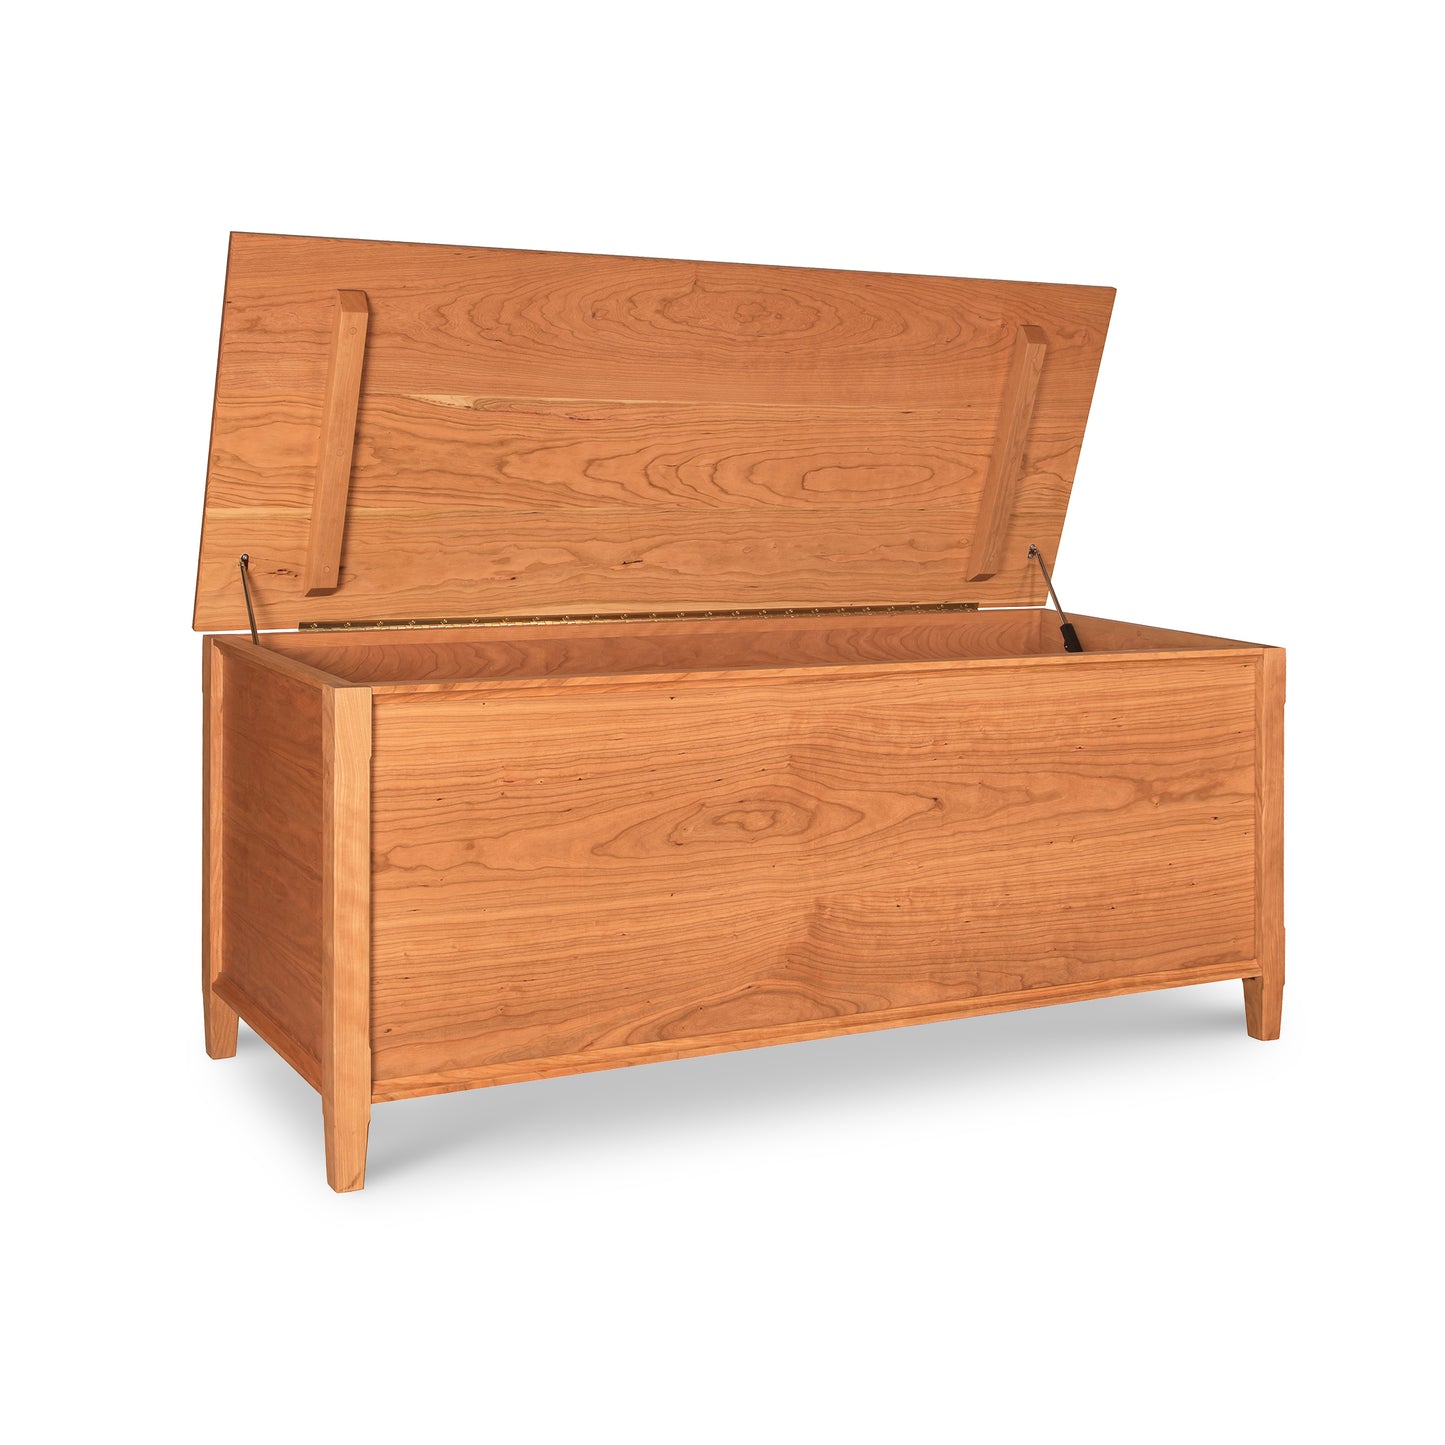 An eco-friendly Vermont Shaker Blanket Chest from Maple Corner Woodworks with a lid, perfect as a luxury blanket chest.